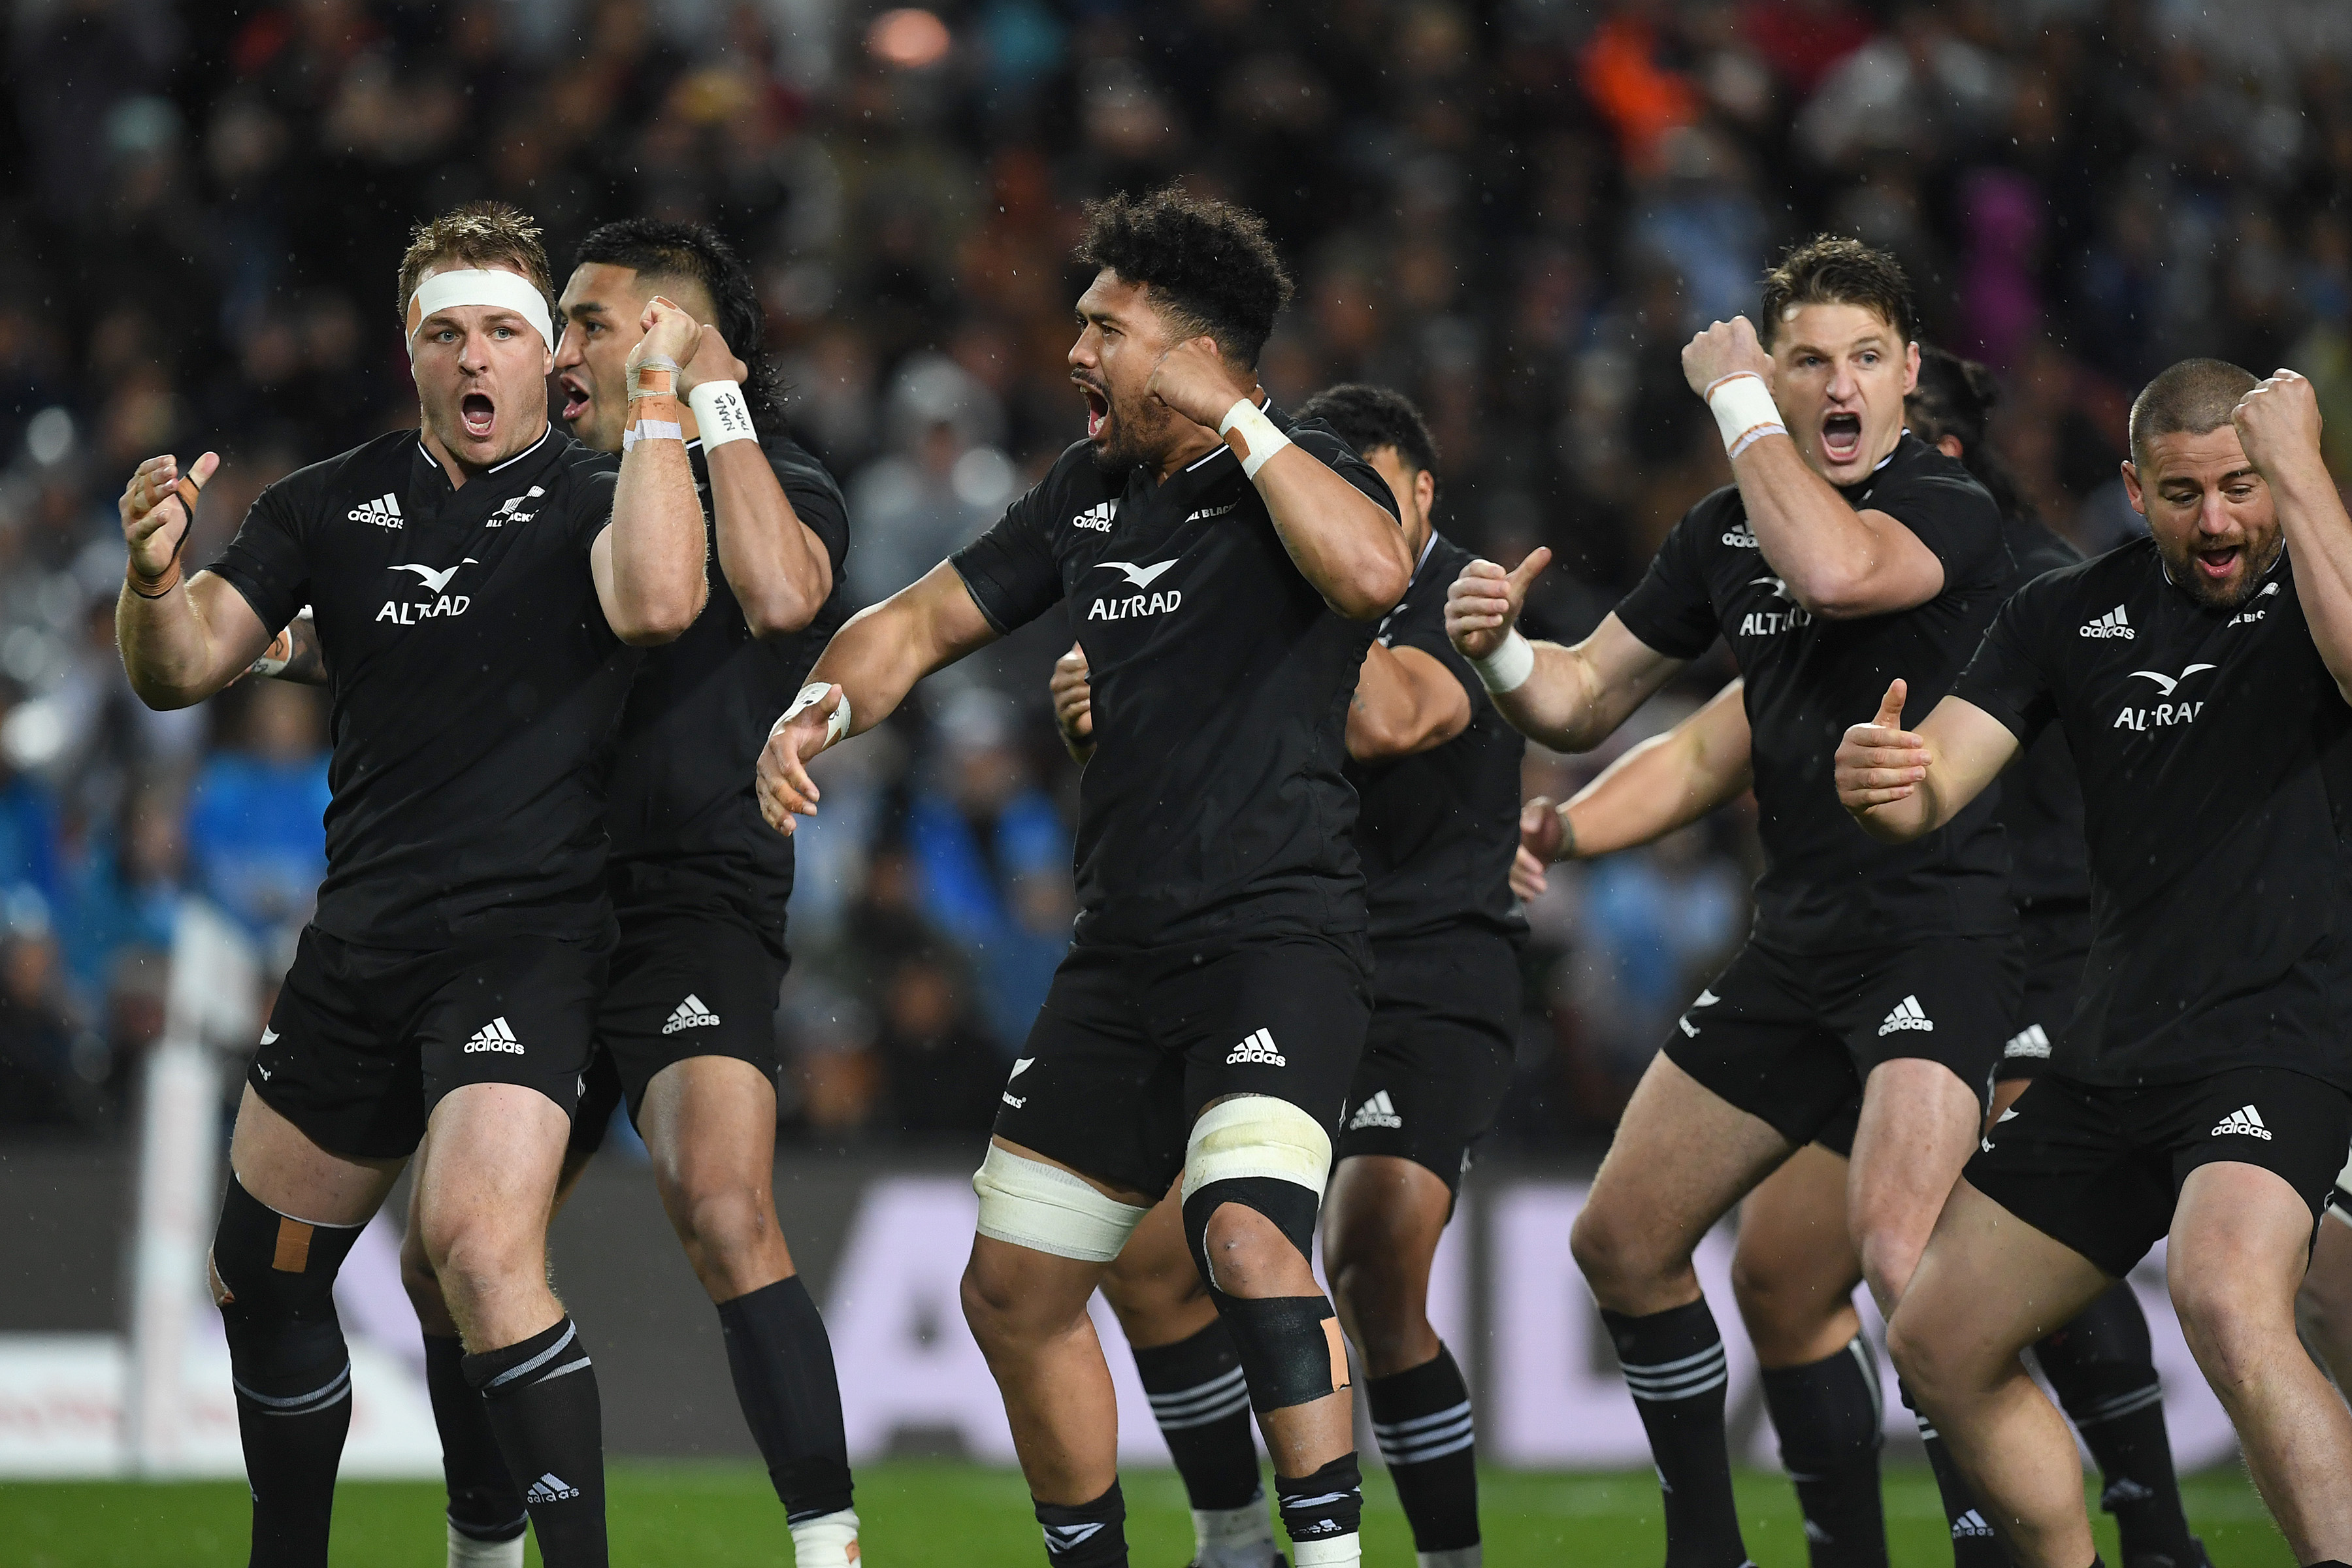 All Blacks v Argentina Pumas Kickoff time, how to watch in NZ, live streaming, teams, odds - all you need to know ahead of Rugby Championship opener